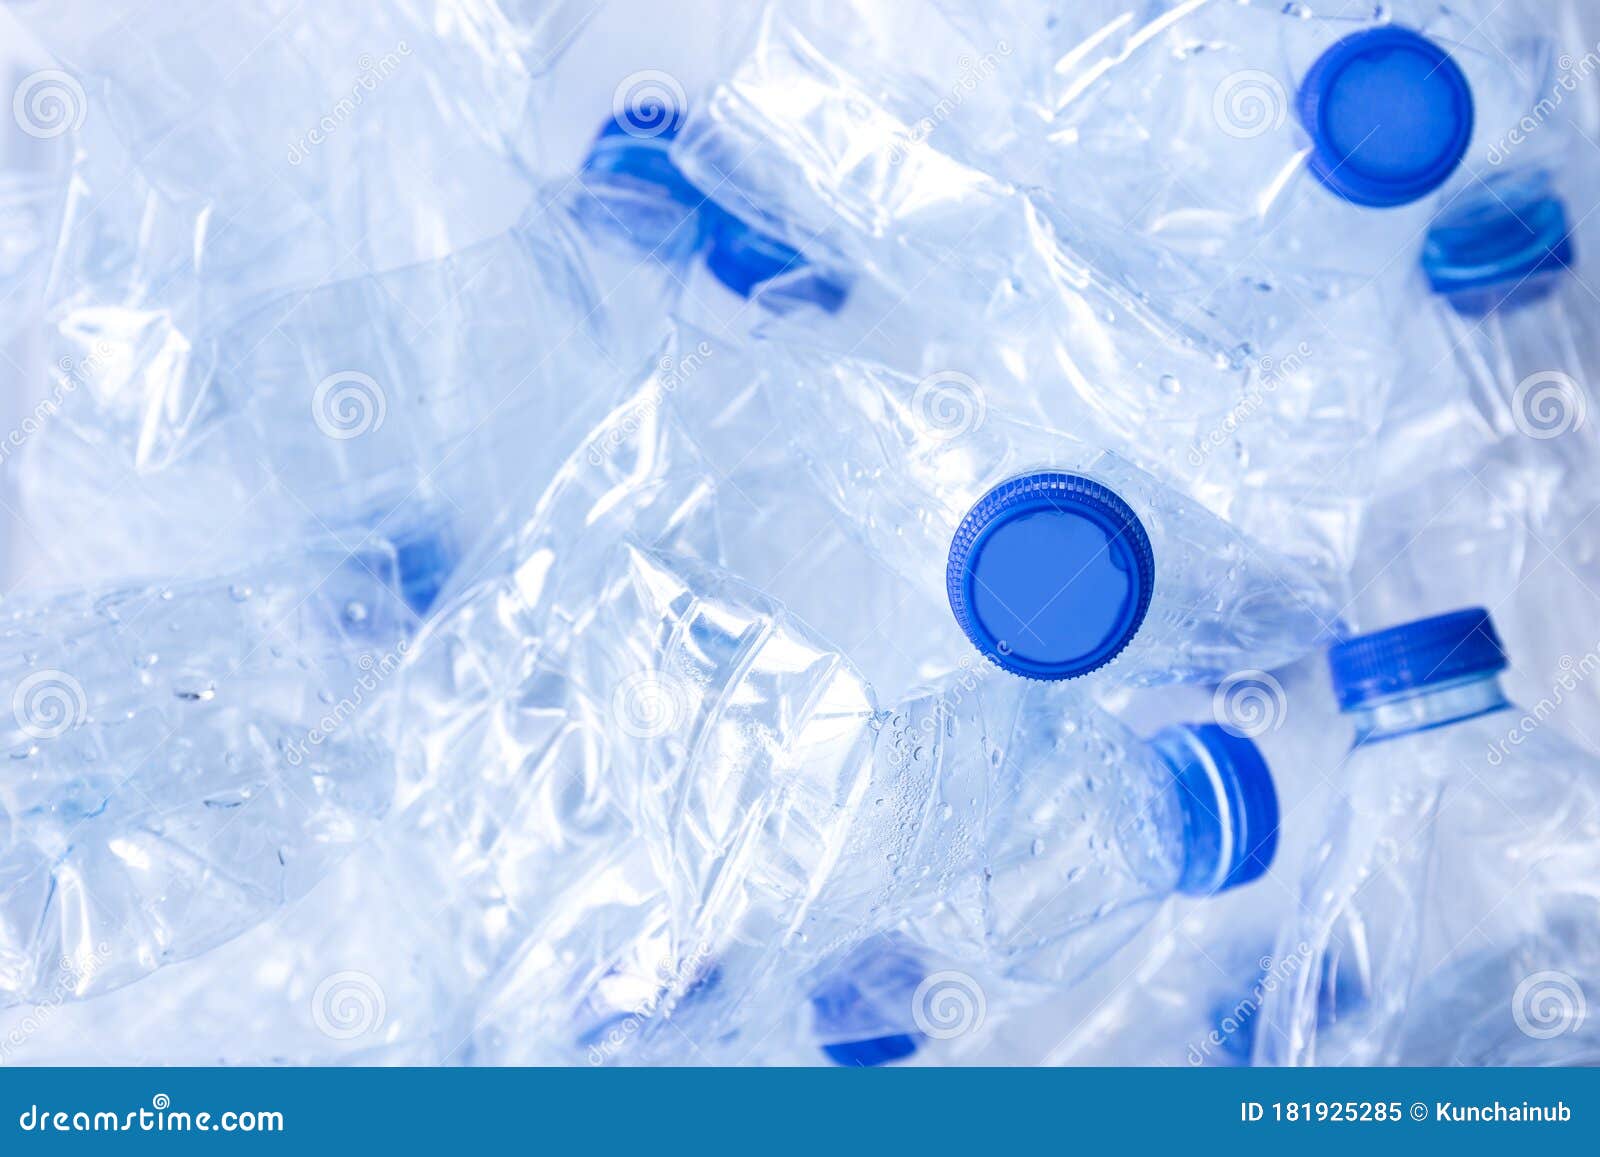 https://thumbs.dreamstime.com/z/empty-plastic-water-bottle-polyethylene-human-waste-pollution-recycle-reusable-package-concept-plastic-recycle-181925285.jpg